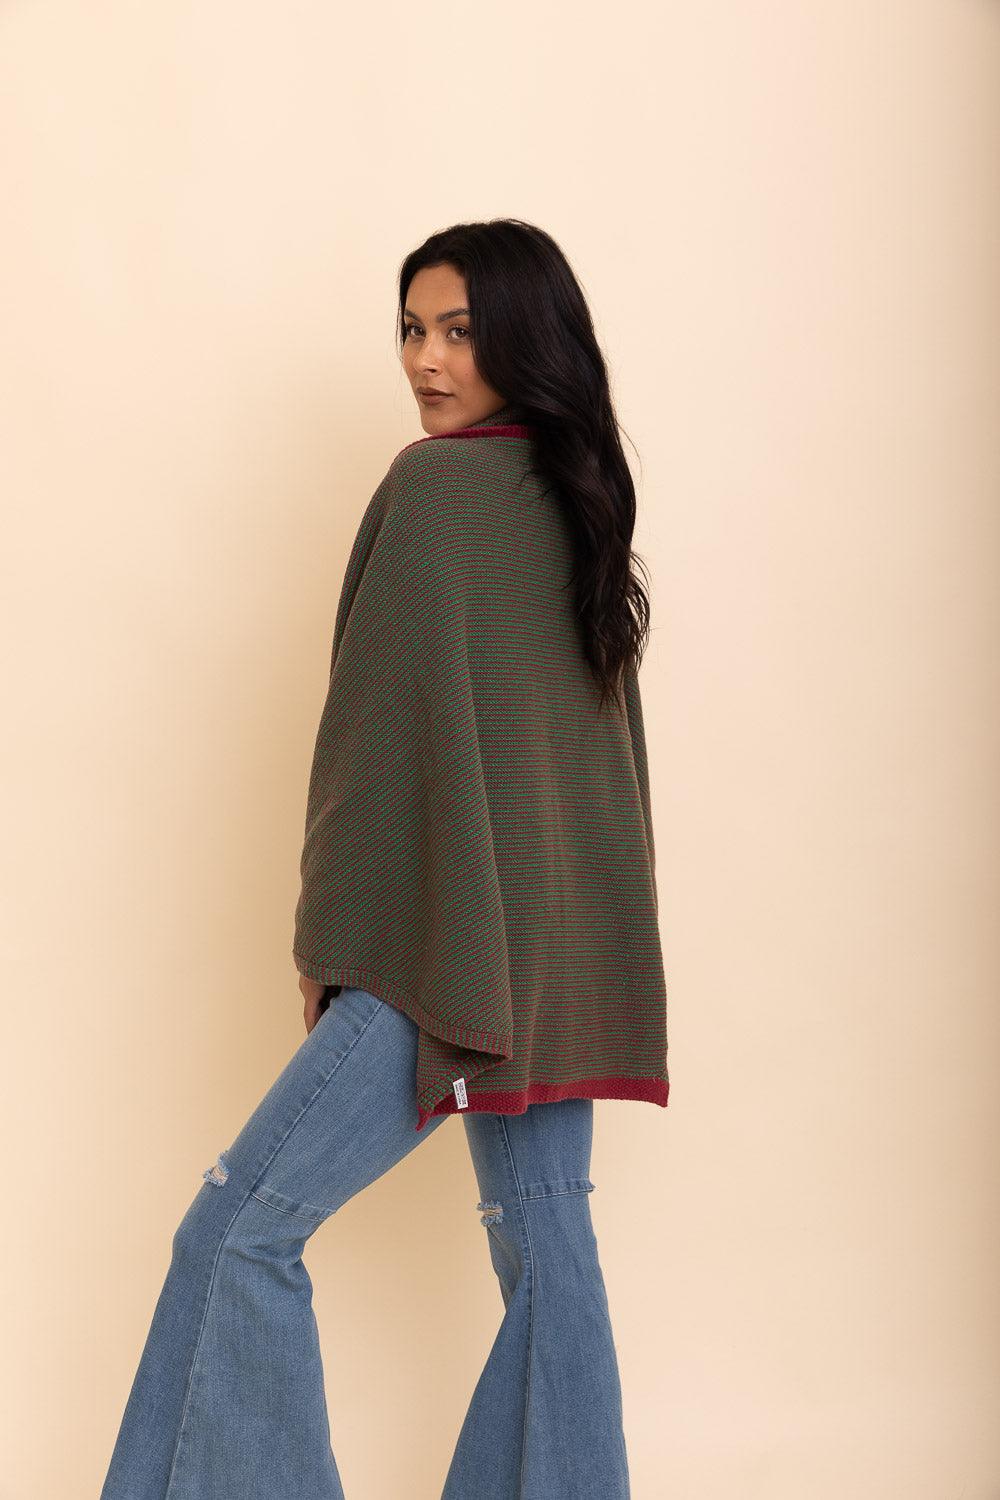 Over The Shoulder Knitted Shawl - Brand My Case